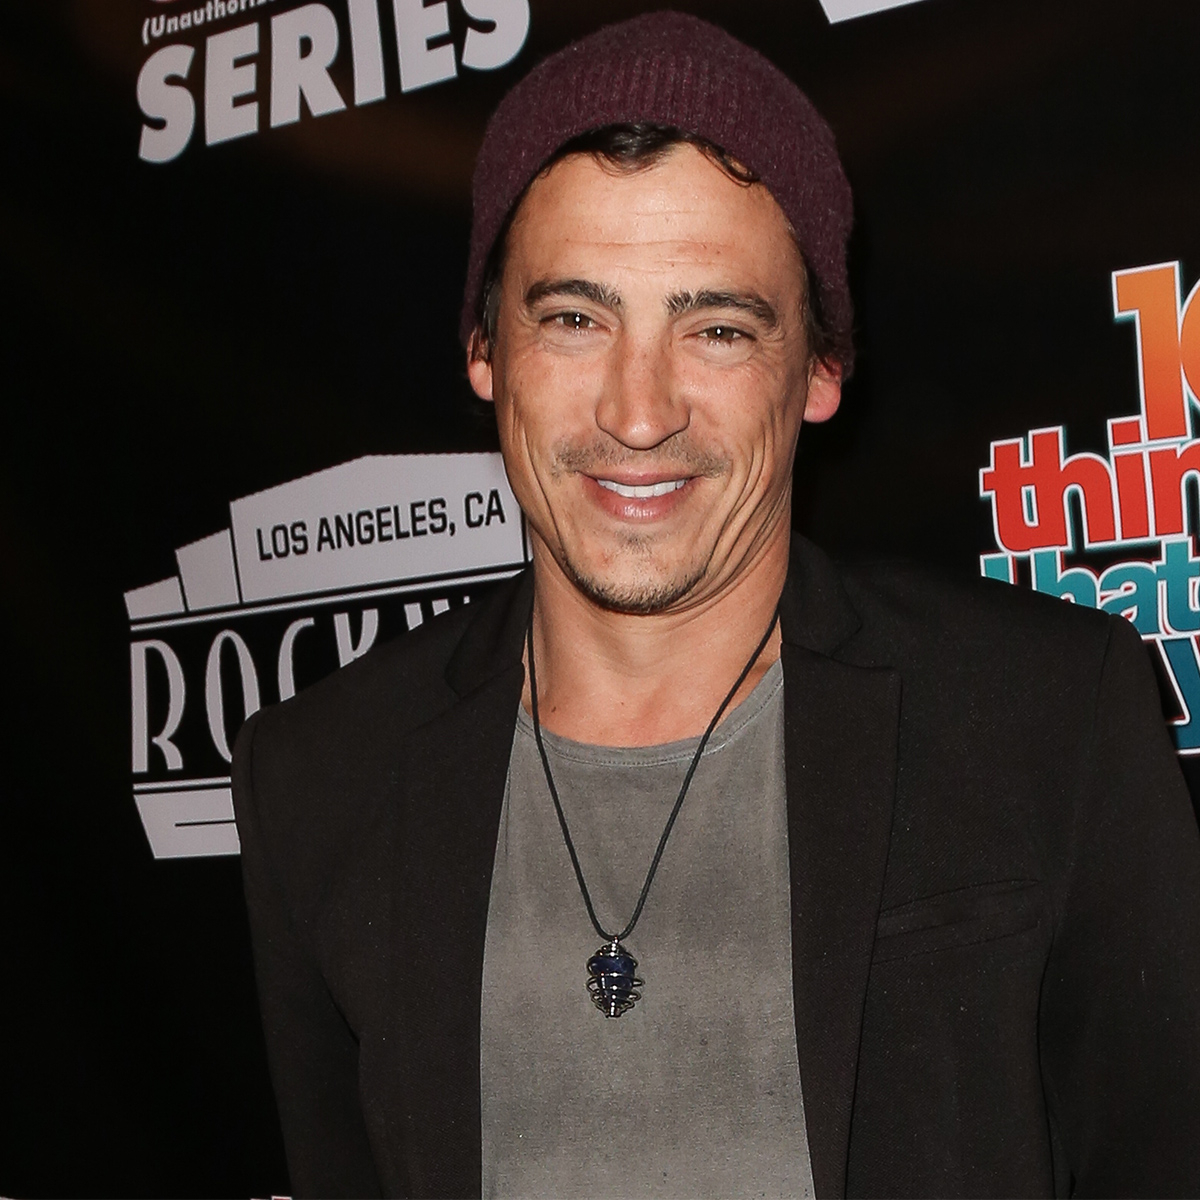 Why 10 Things I Hate About You Actor Andrew Keegan Finally Addressed Cult Leader Claims